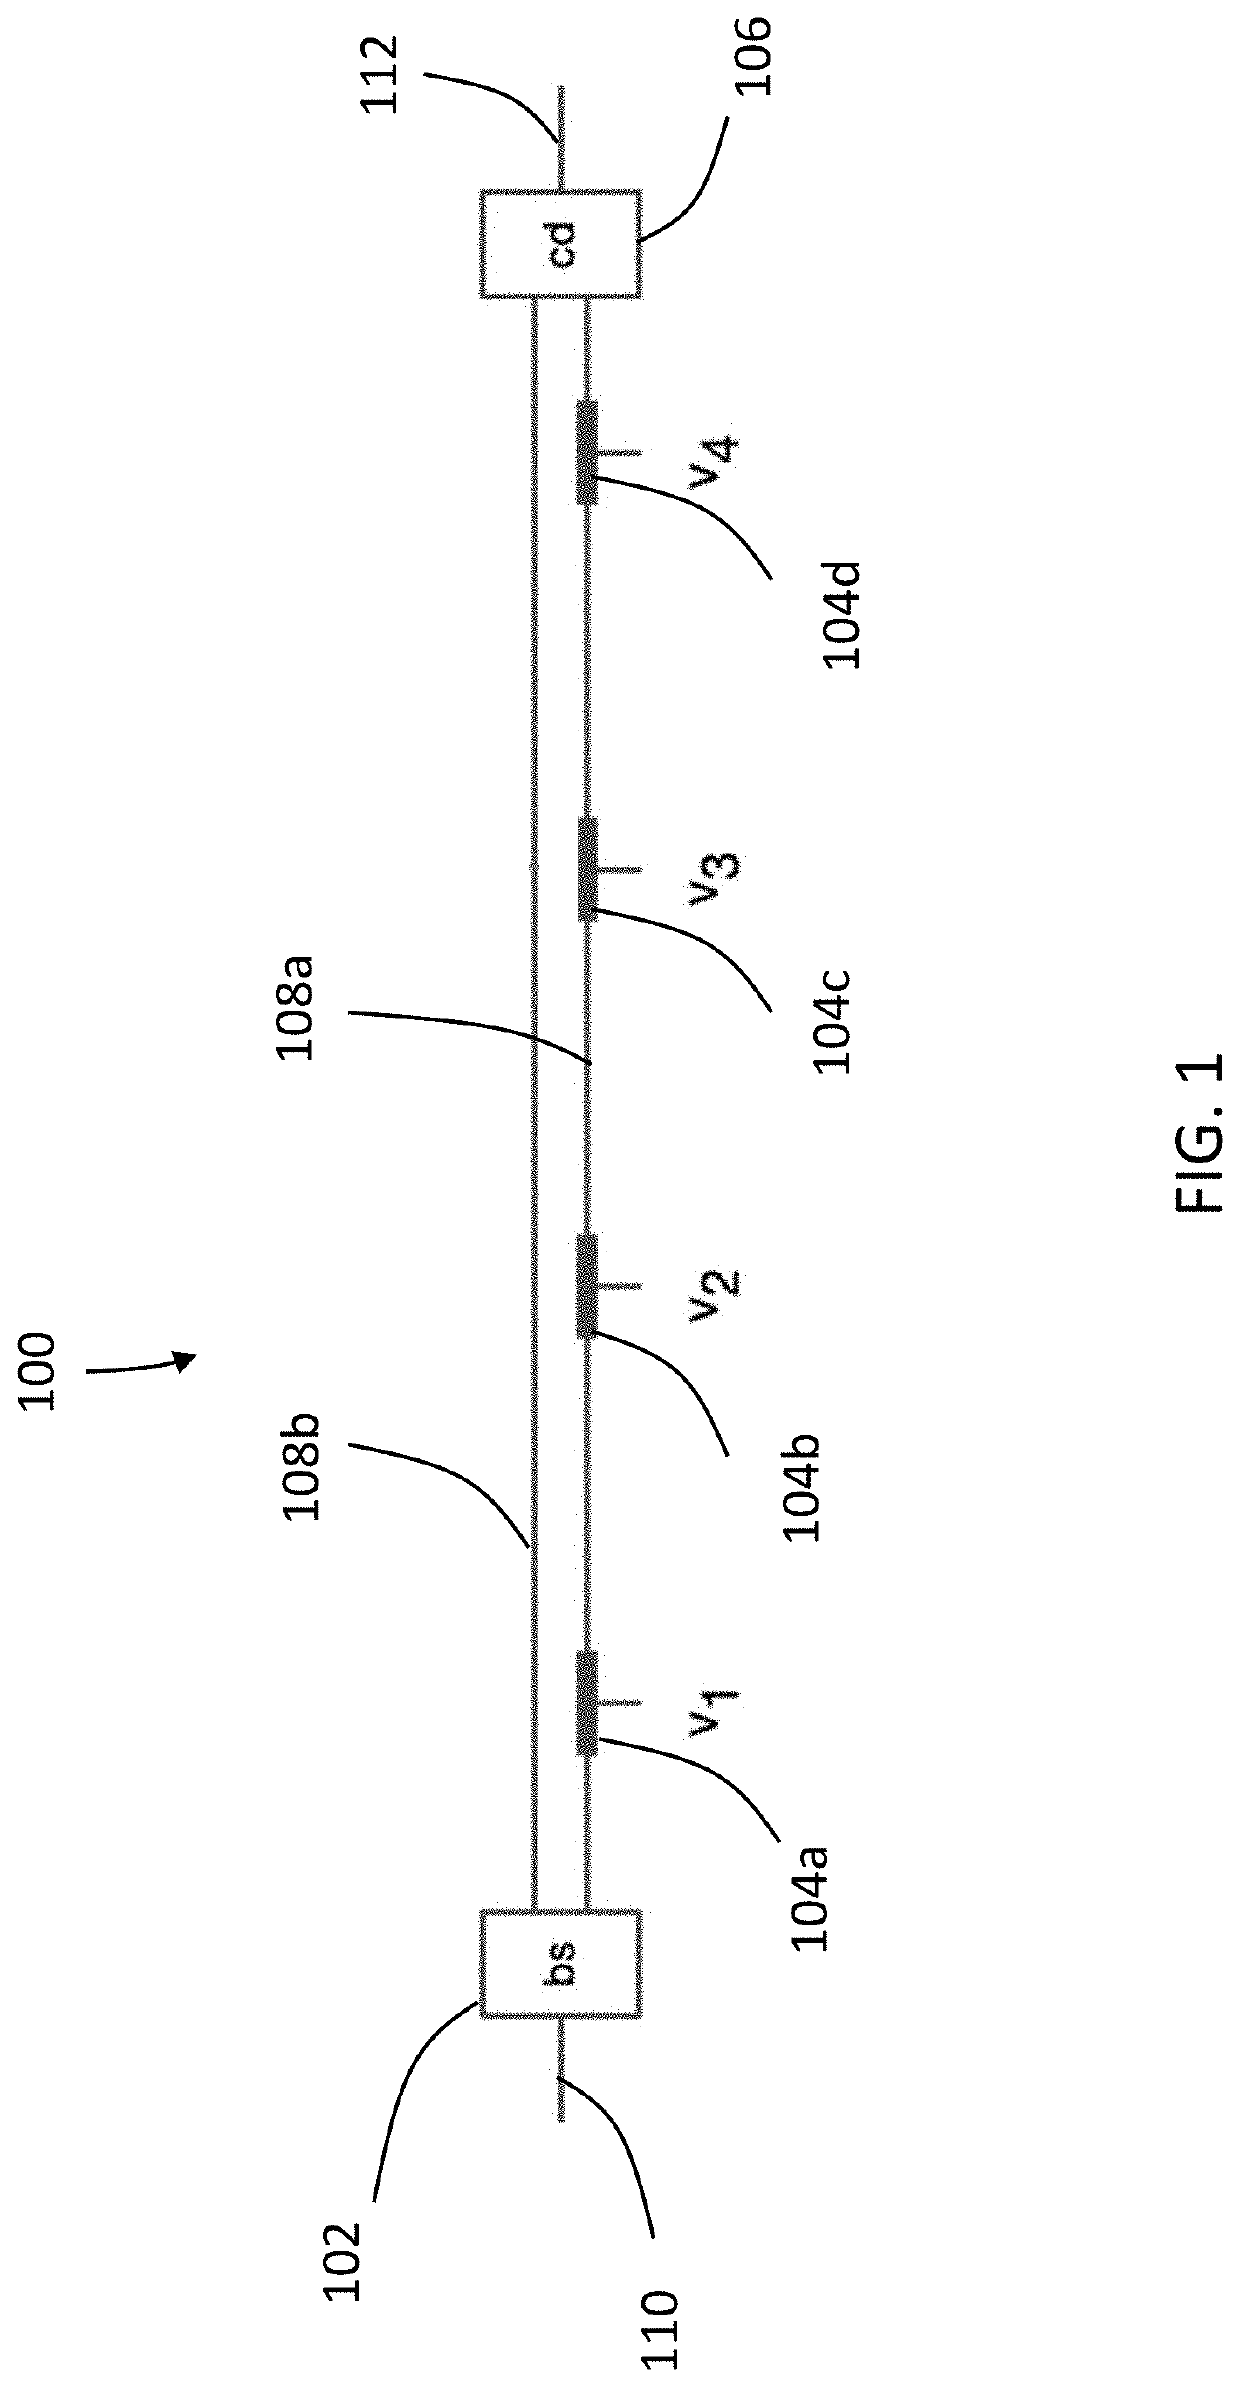 Residue number system in a photonic matrix accelerator